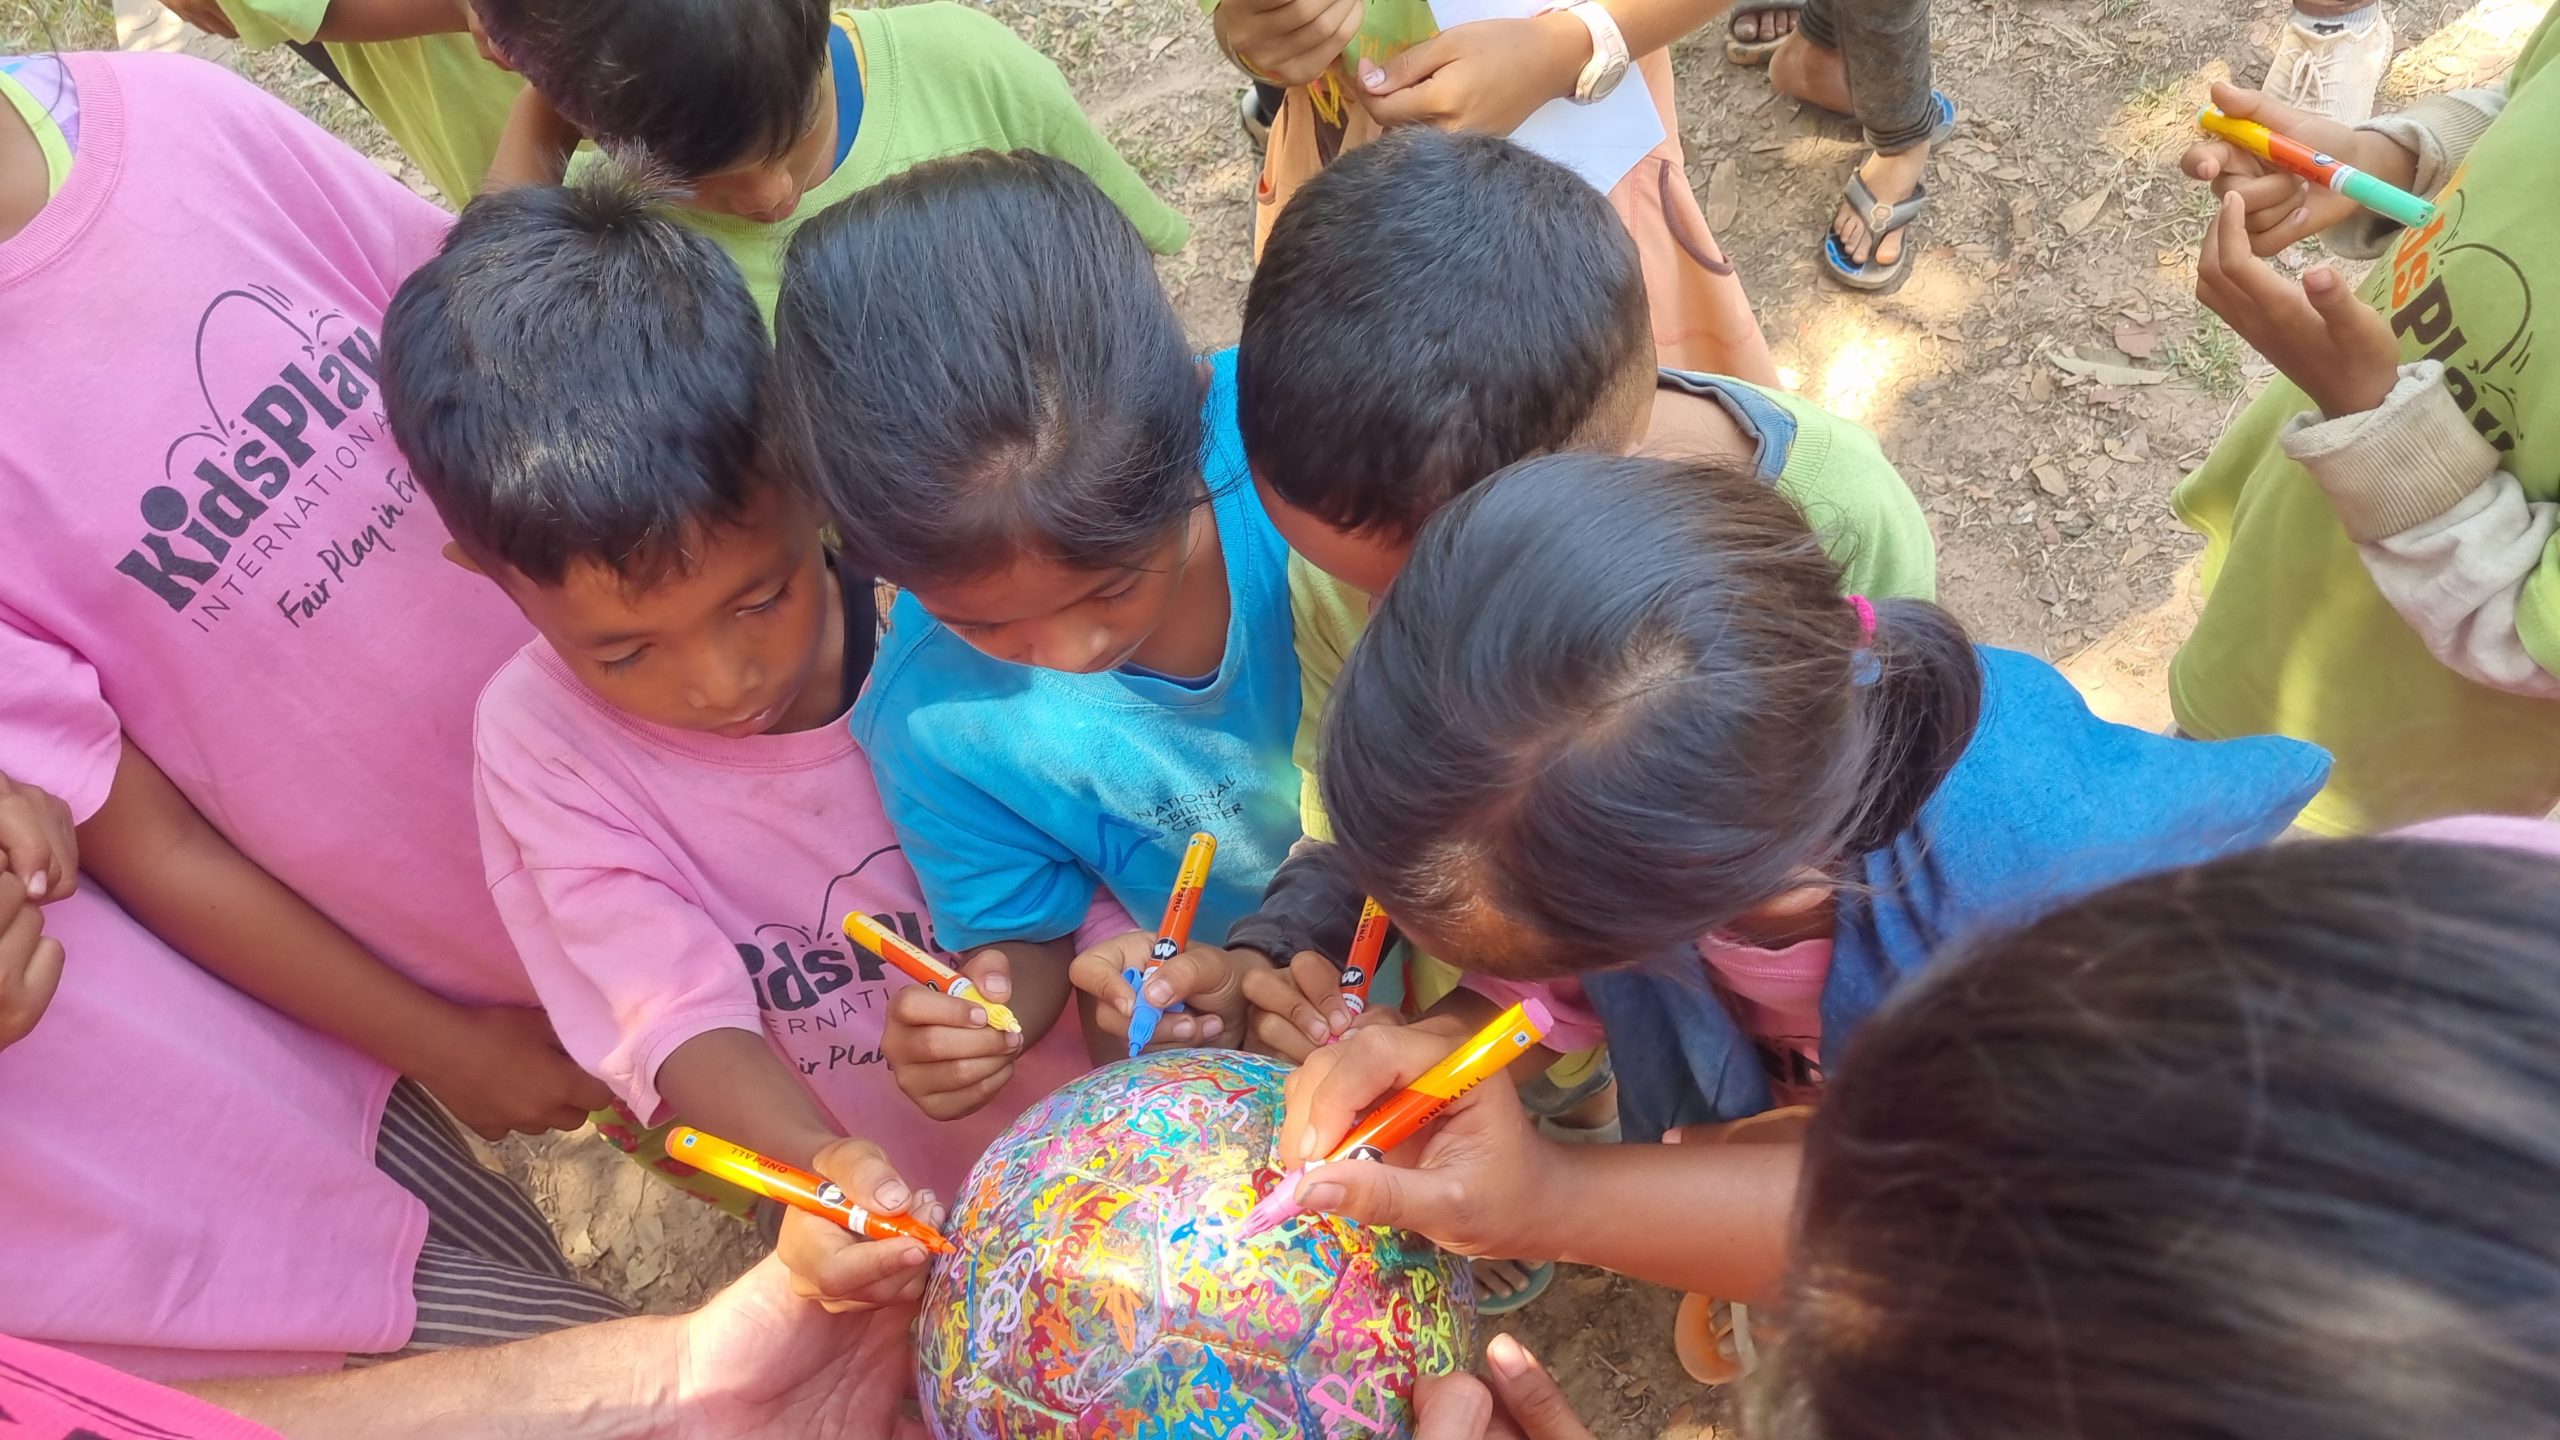 Children sign The Ball at Kids Play International, Cambodia